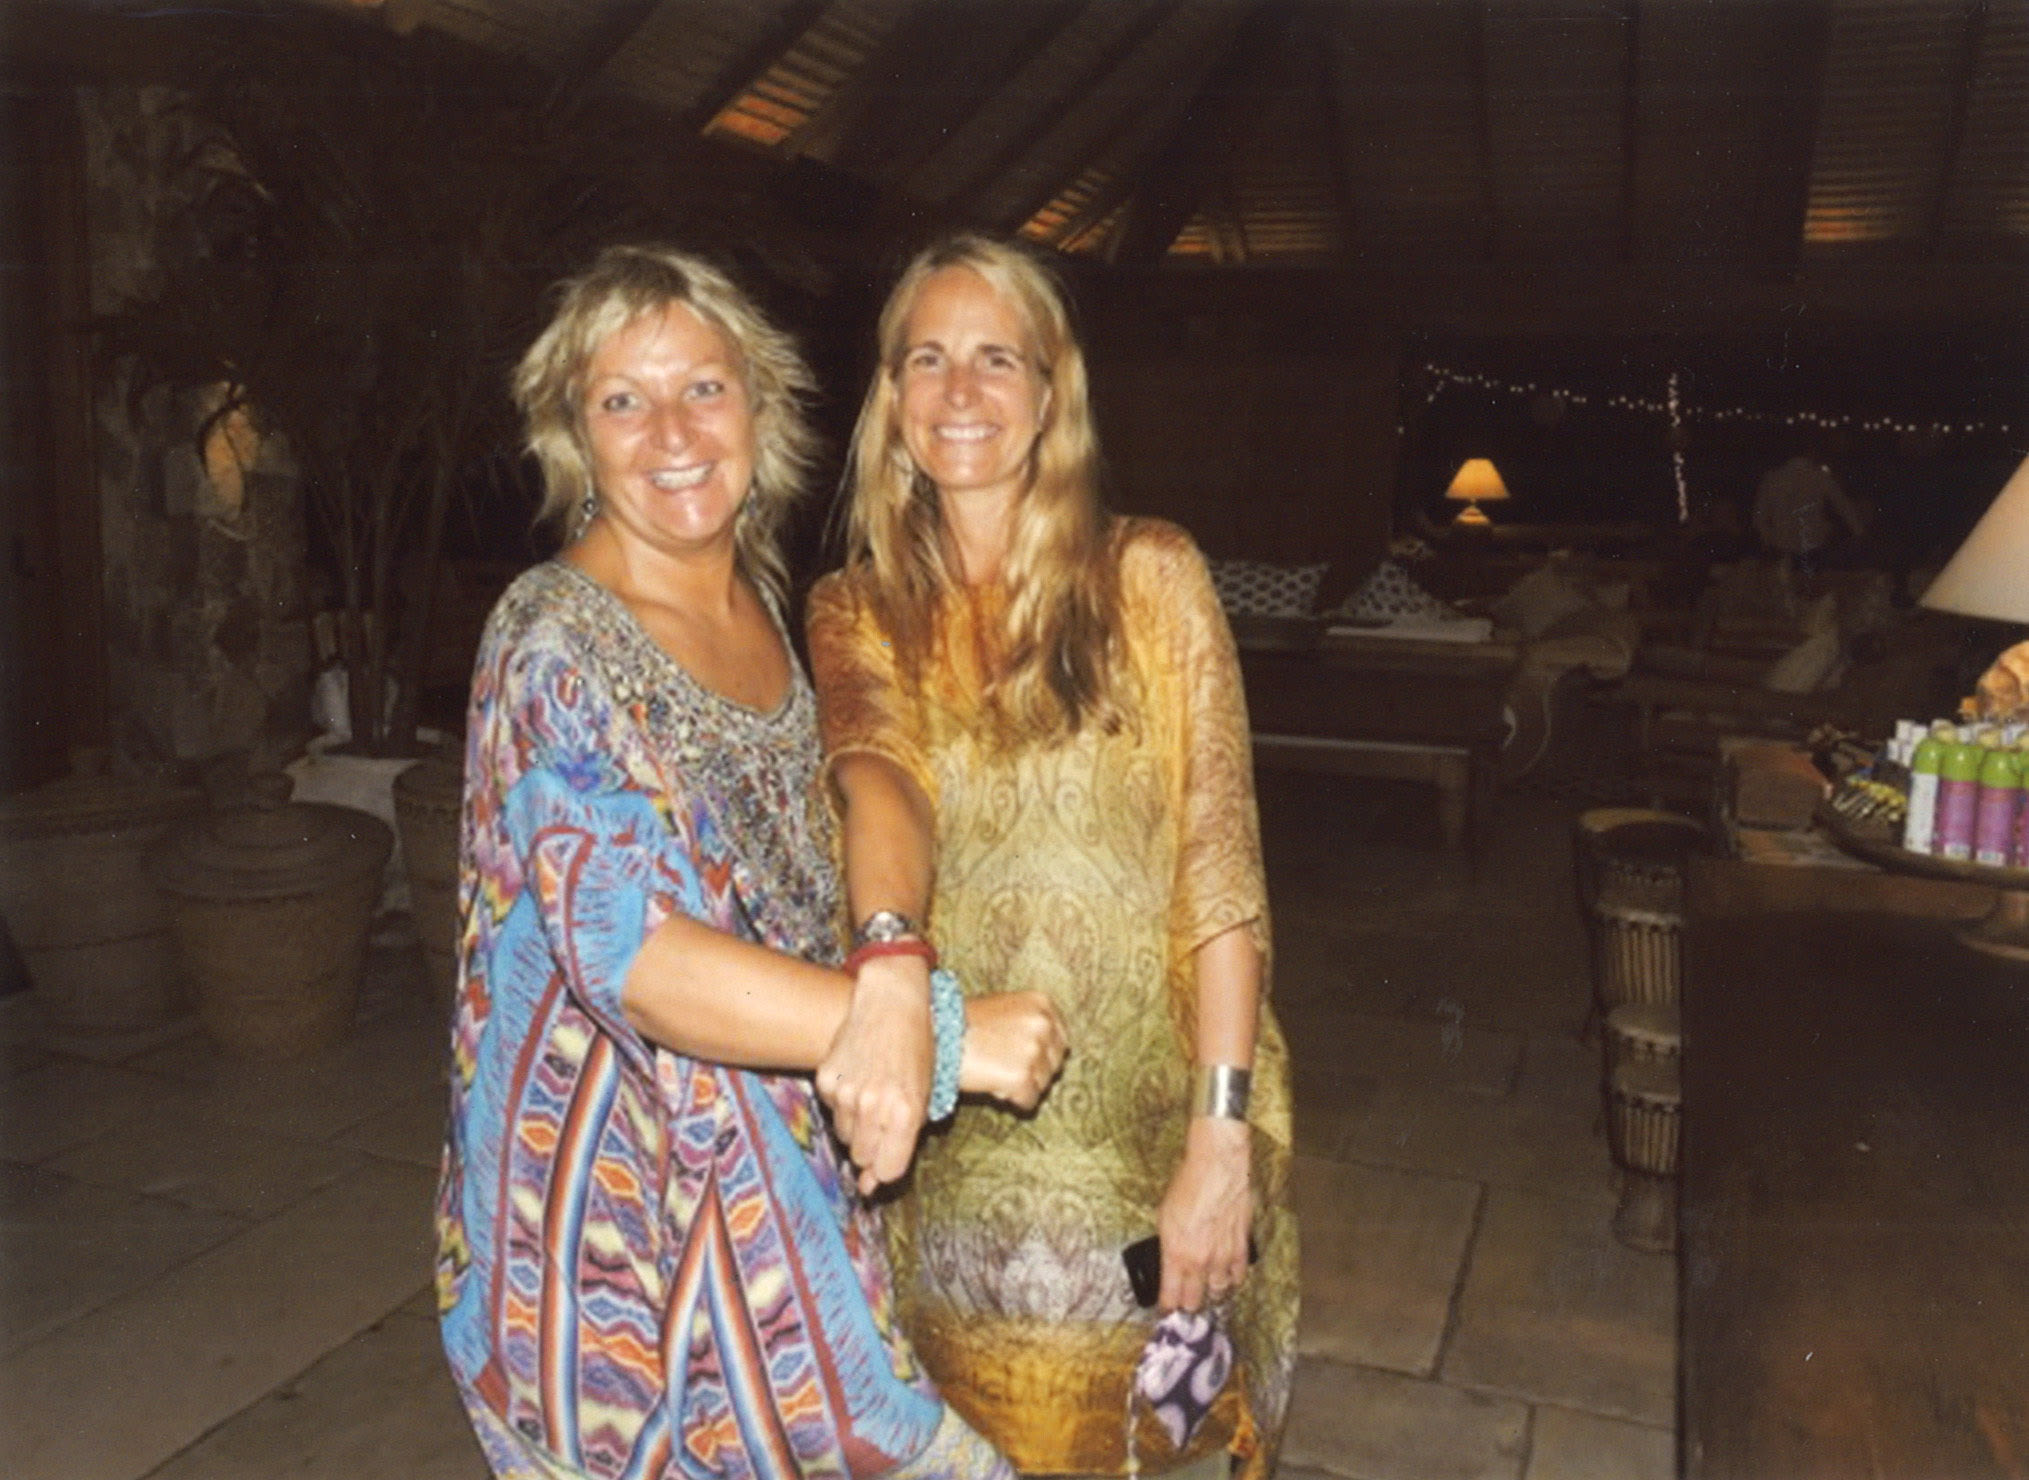 Jane Tewson and Jean Oelwang smile together at a Virgin Unite Gathering on Necker Island